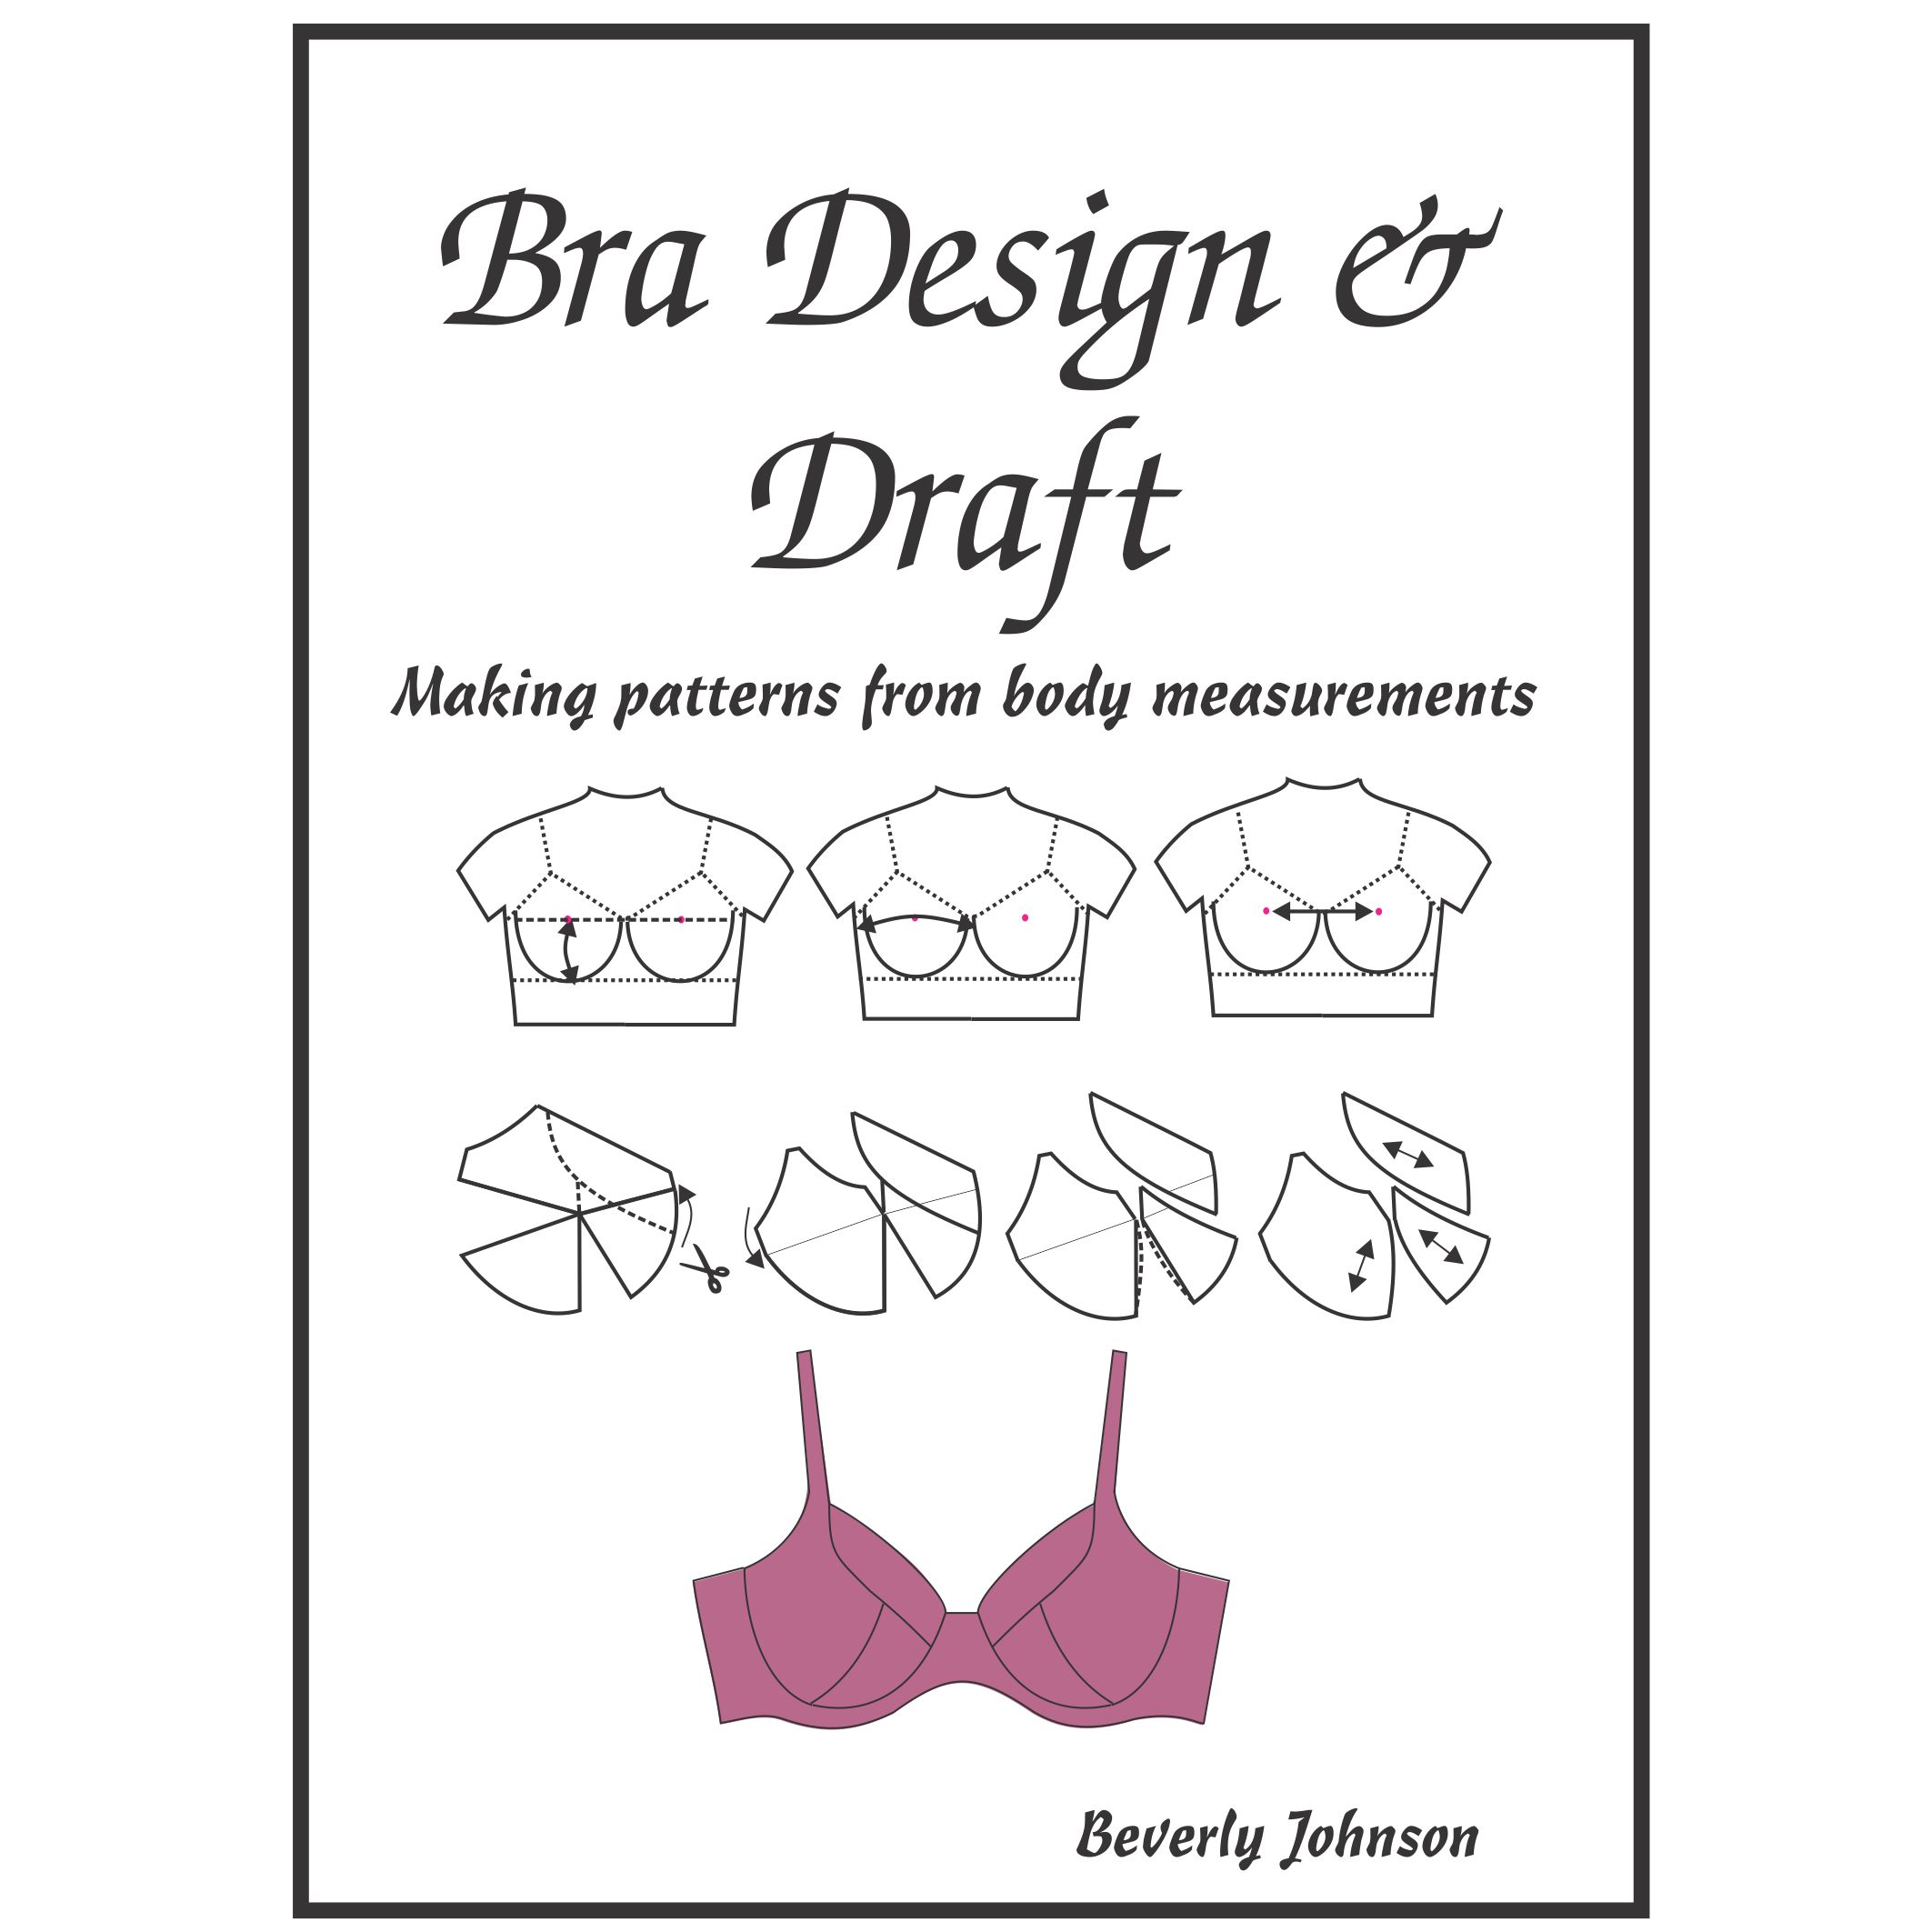 Buy Bare Essentials: Bras - Construction and Pattern Drafting for